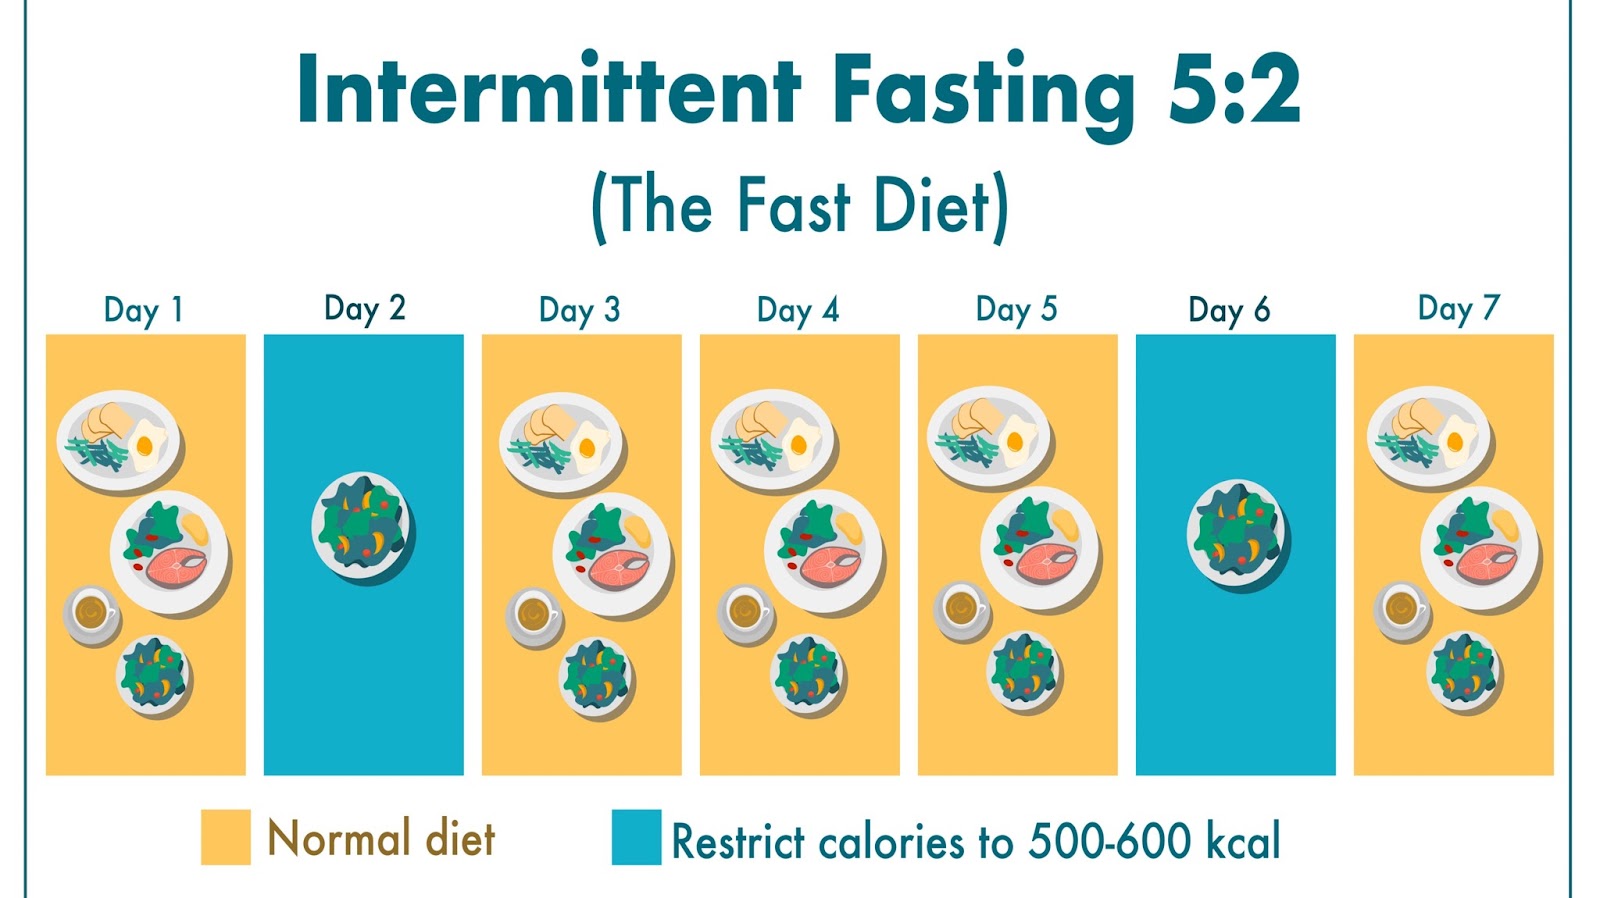 Evidence-Based Benefits and Methods of Intermittent Fasting